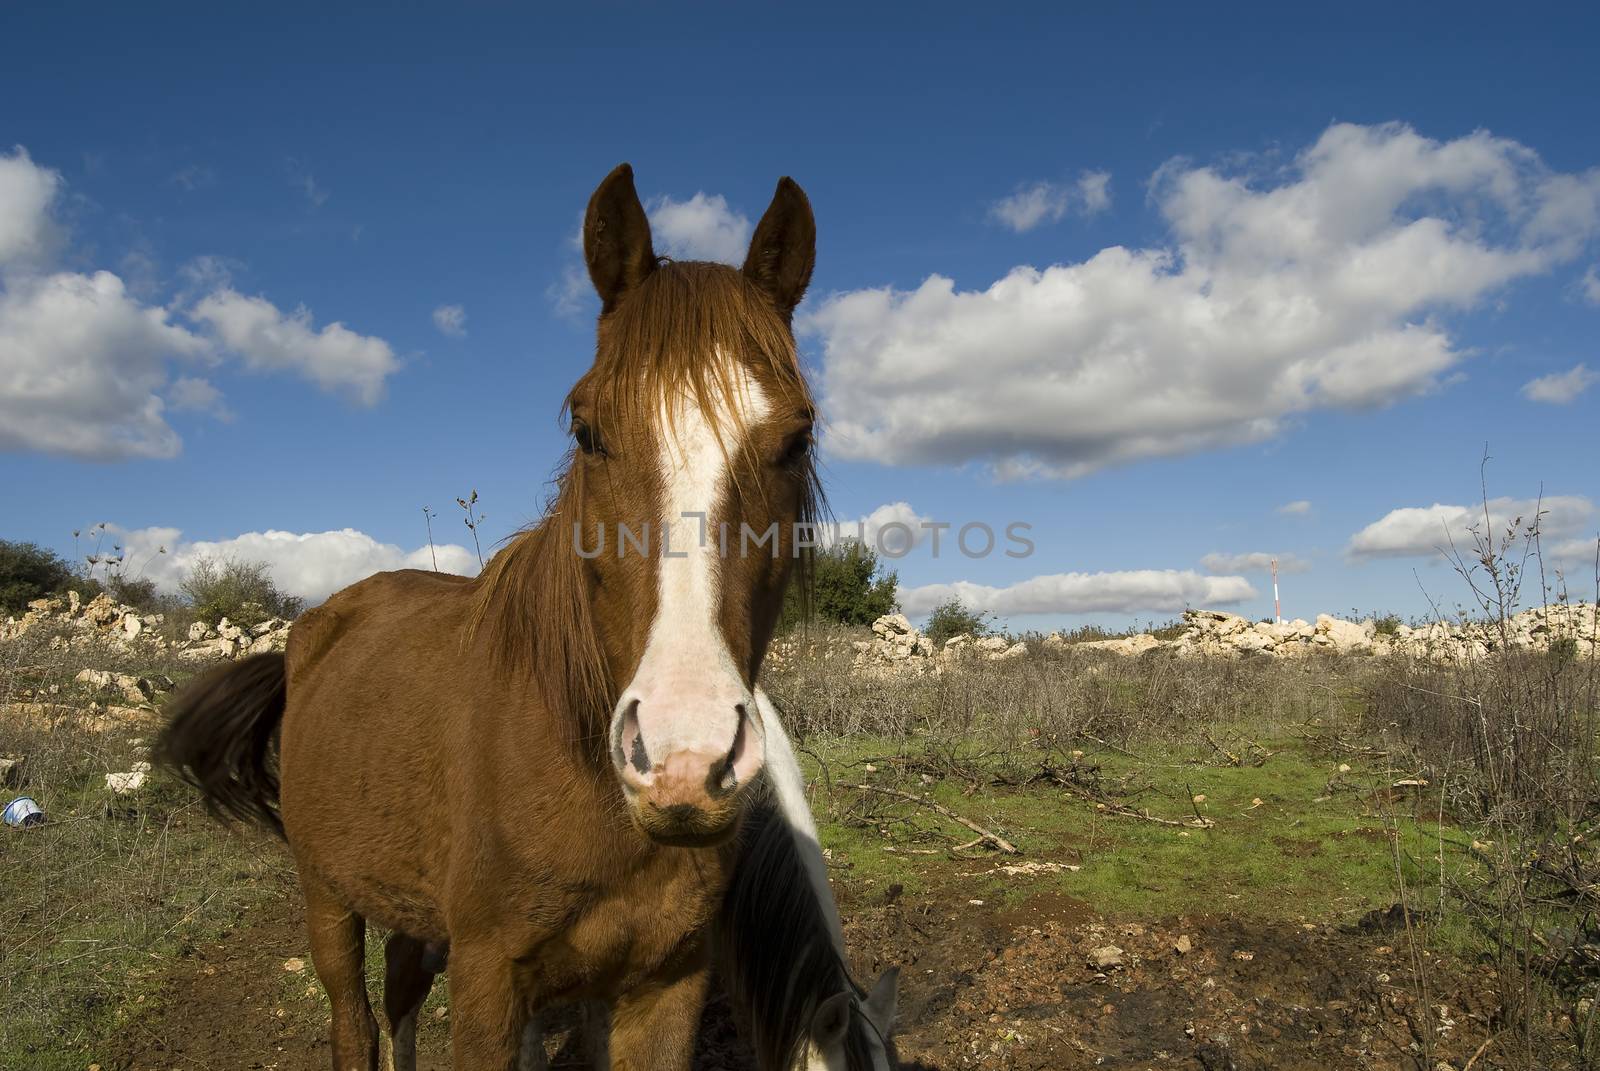 The horse raised his head and looks closely at the photographer 
